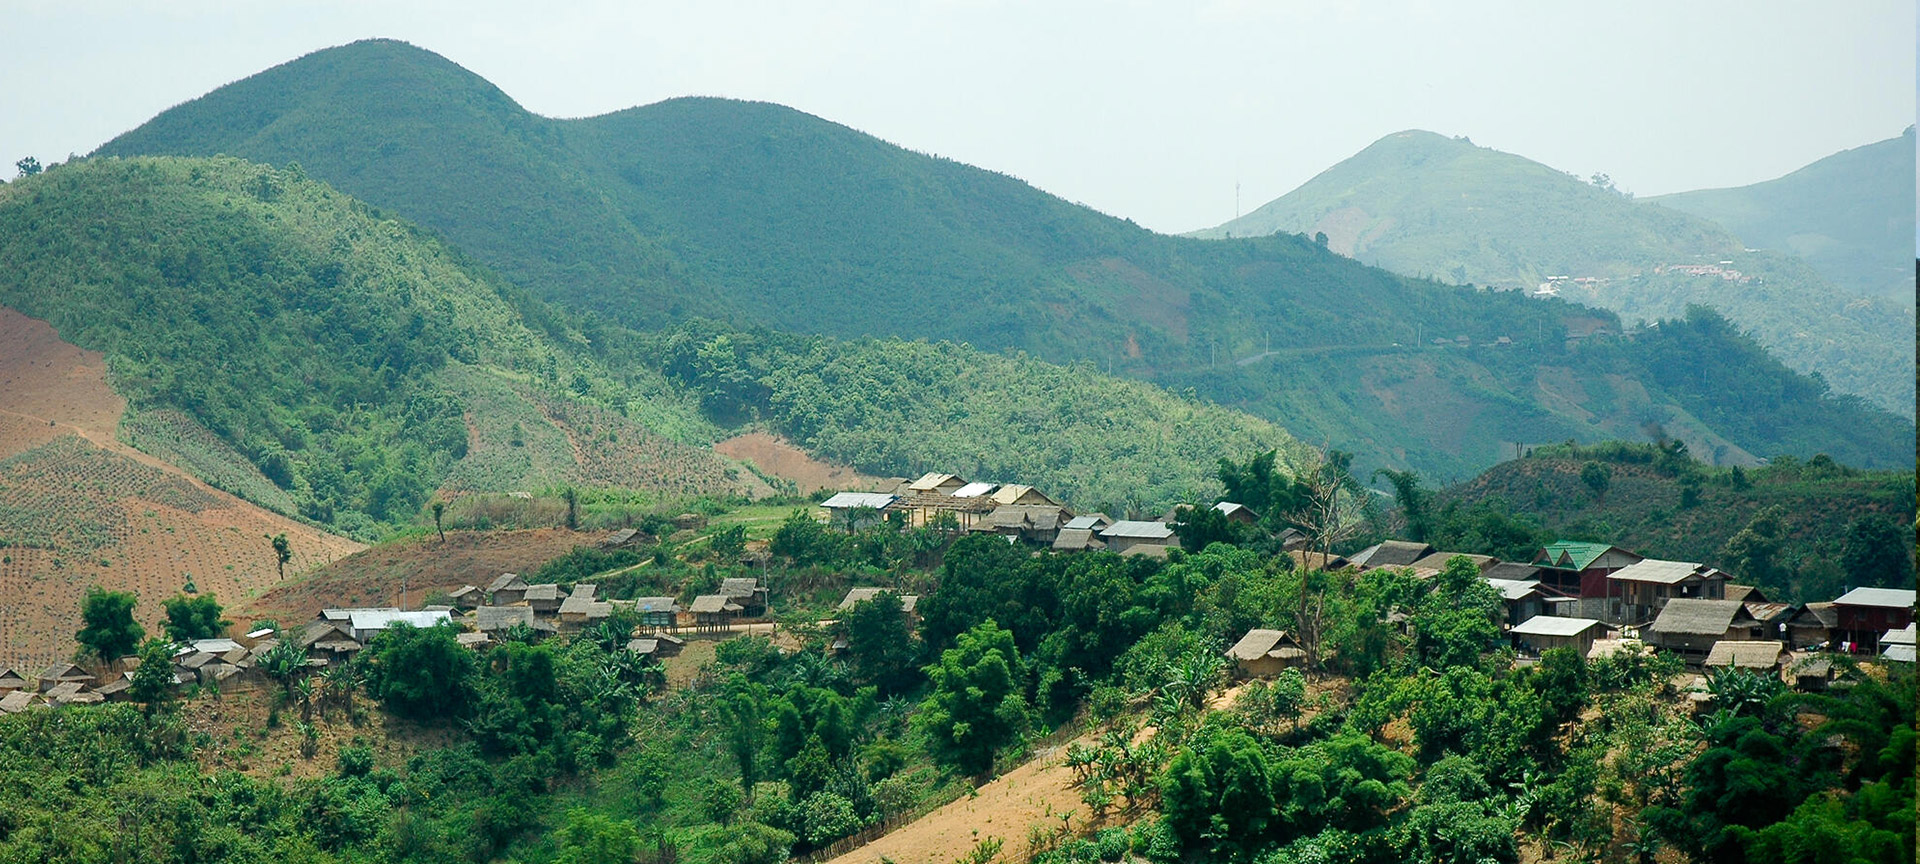 Green hills and mountains surround a few small brown homes. 